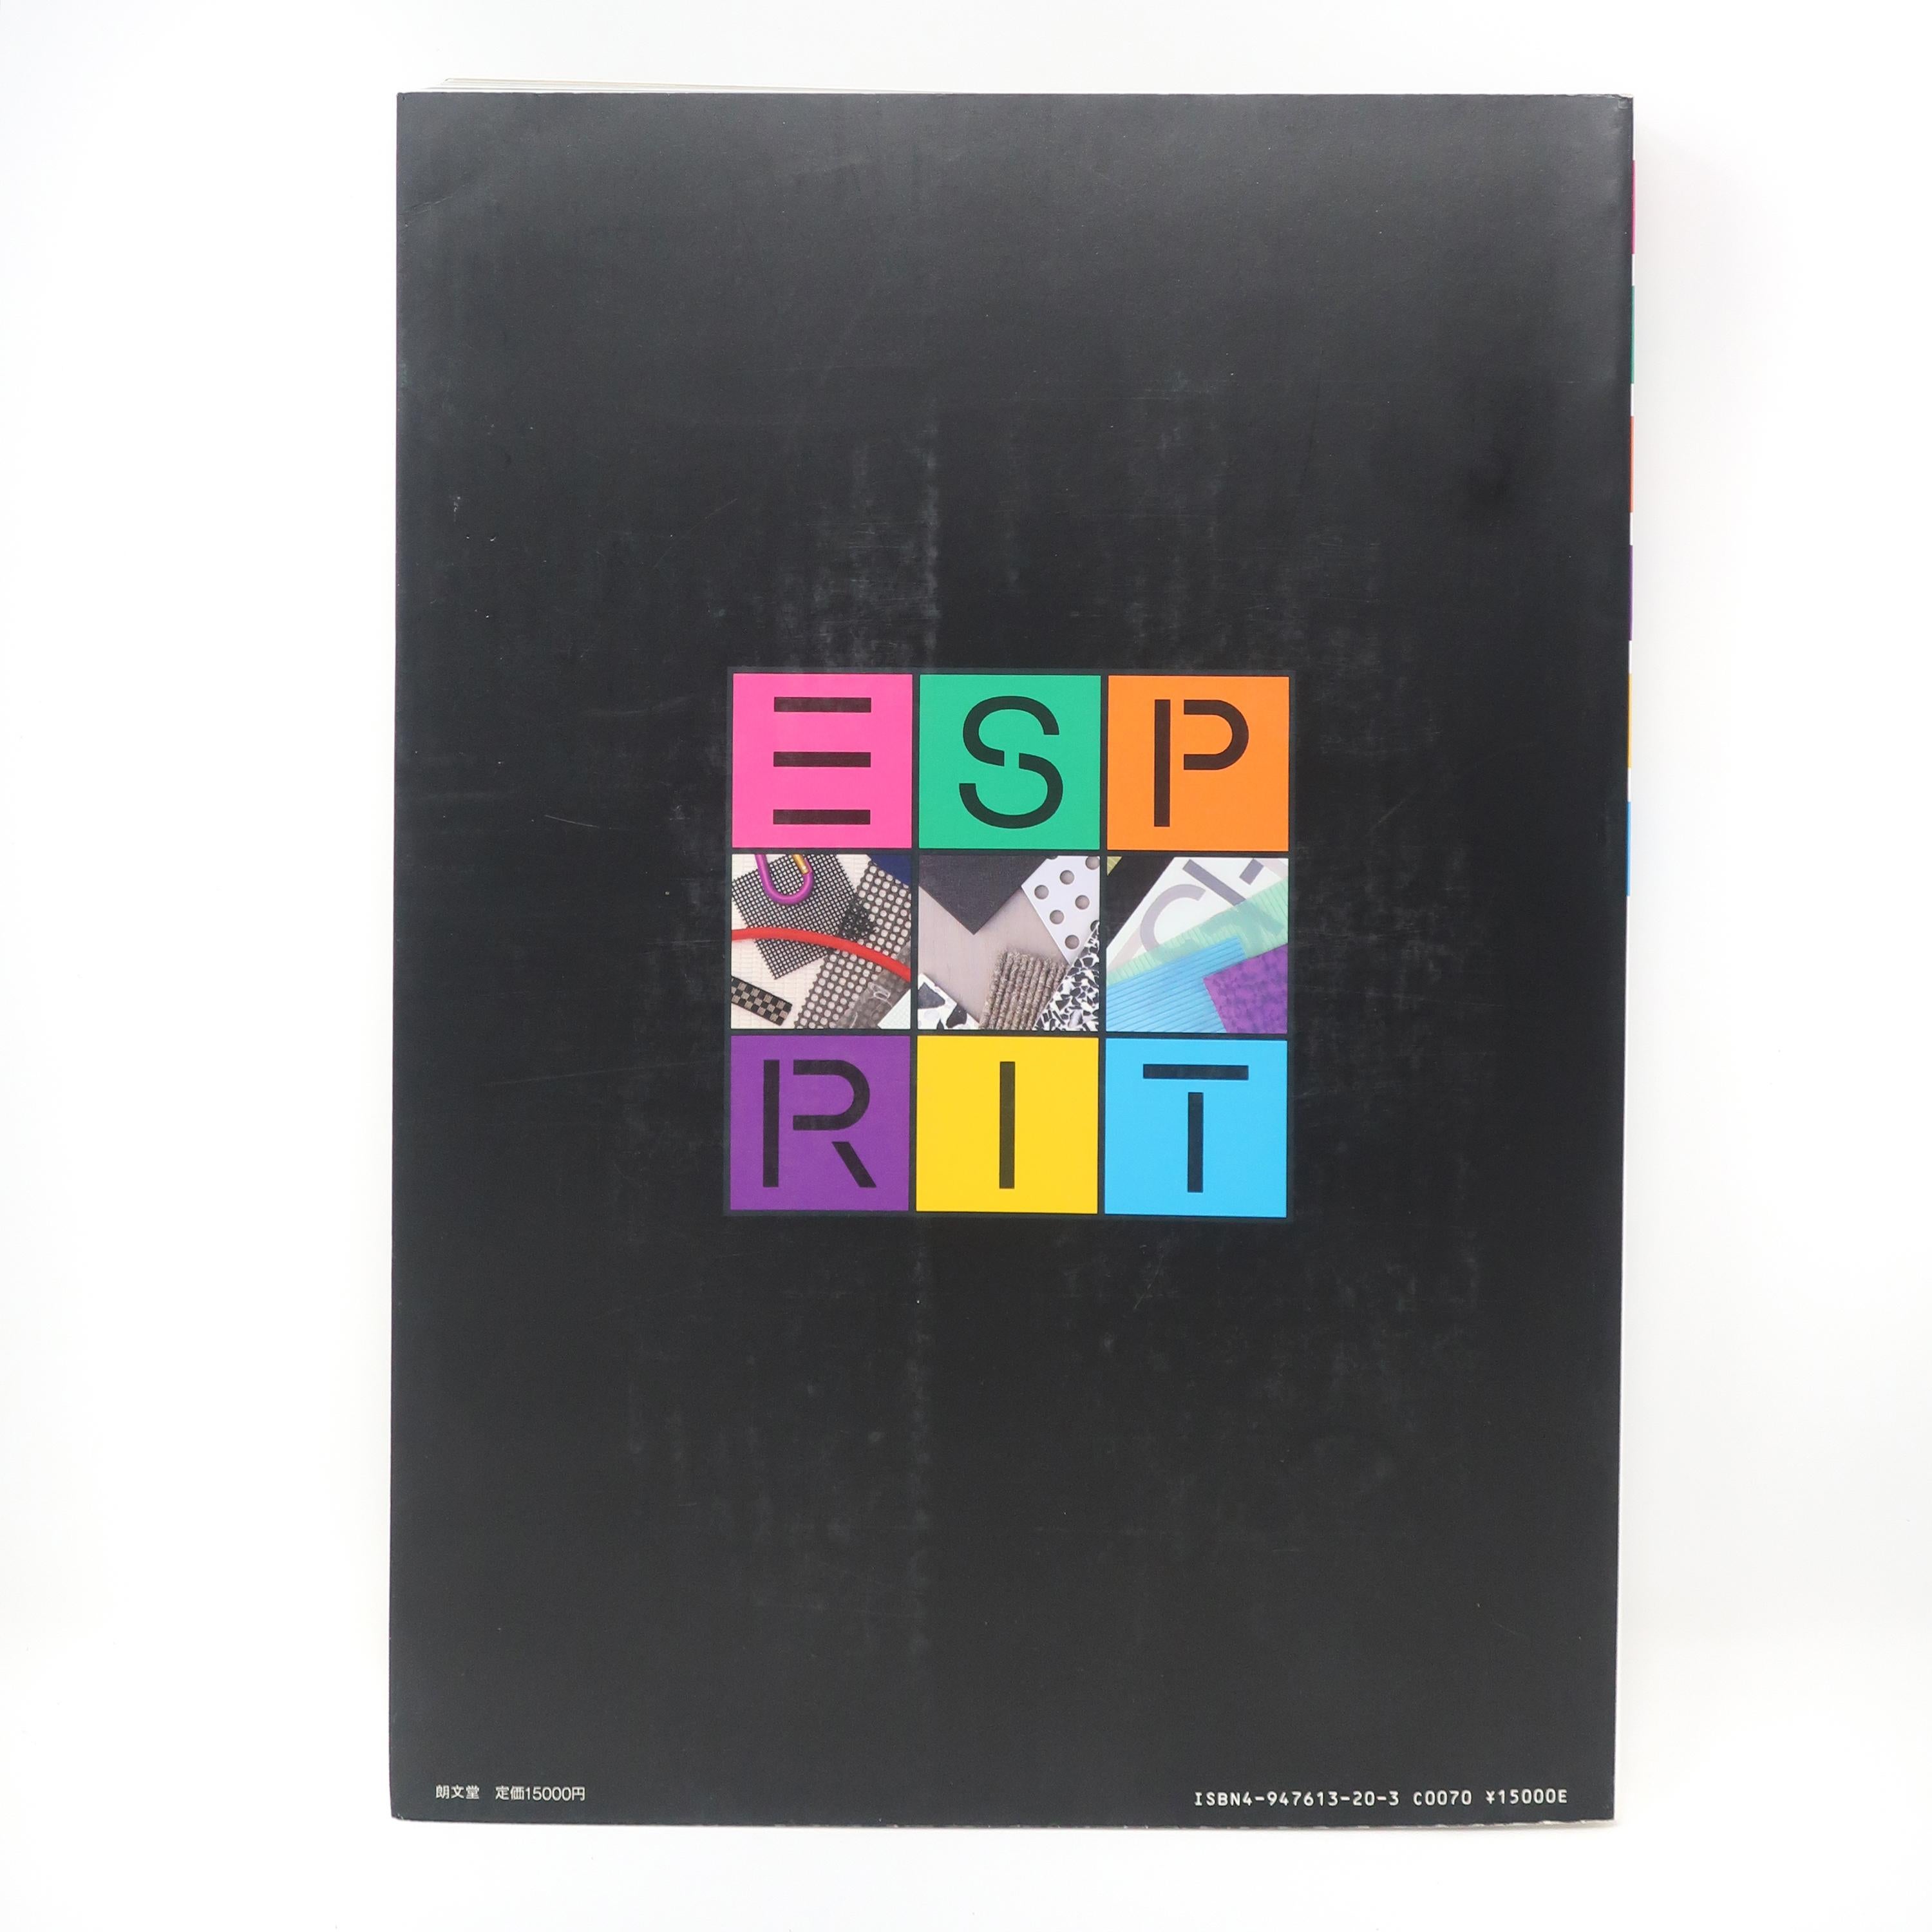 A gorgeous oversized softcover book filled with hundreds of color images of Esprit ads, graphic design, show rooms and stores, and other memorabilia. Written and edited by Doug Tompkins and published by Robundo, this book is a celebration of